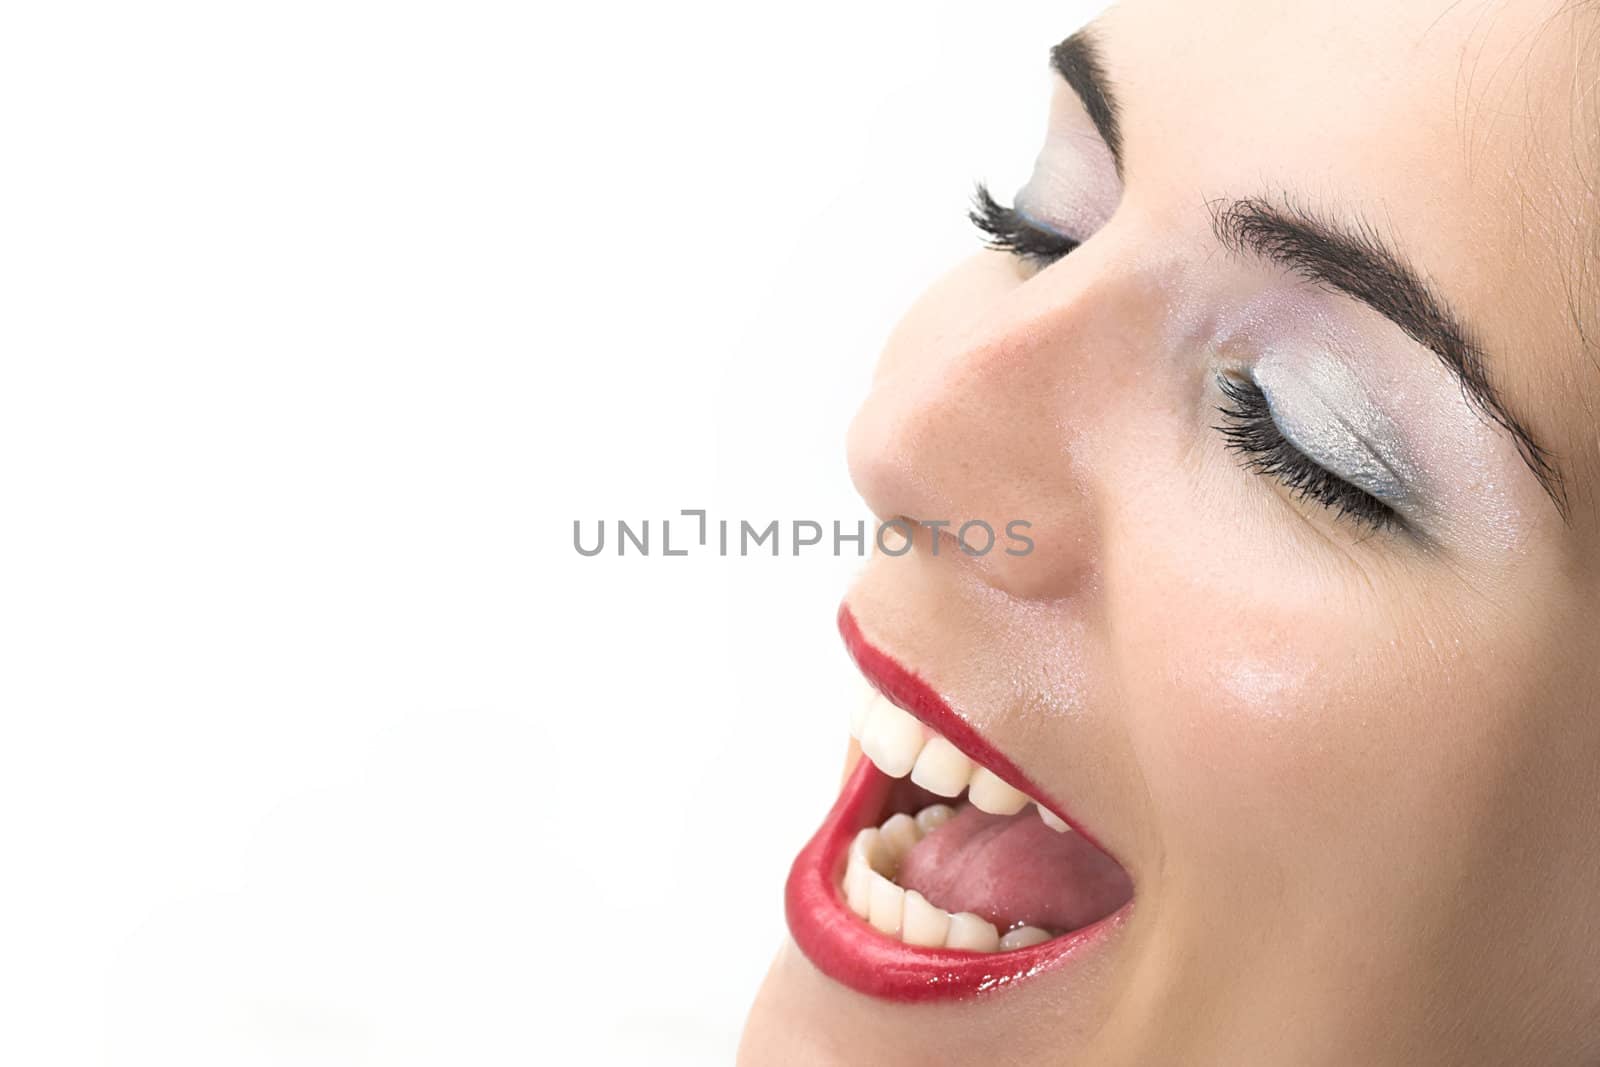 Beautiful woman portrait with shallow depth of field with focus on the eye